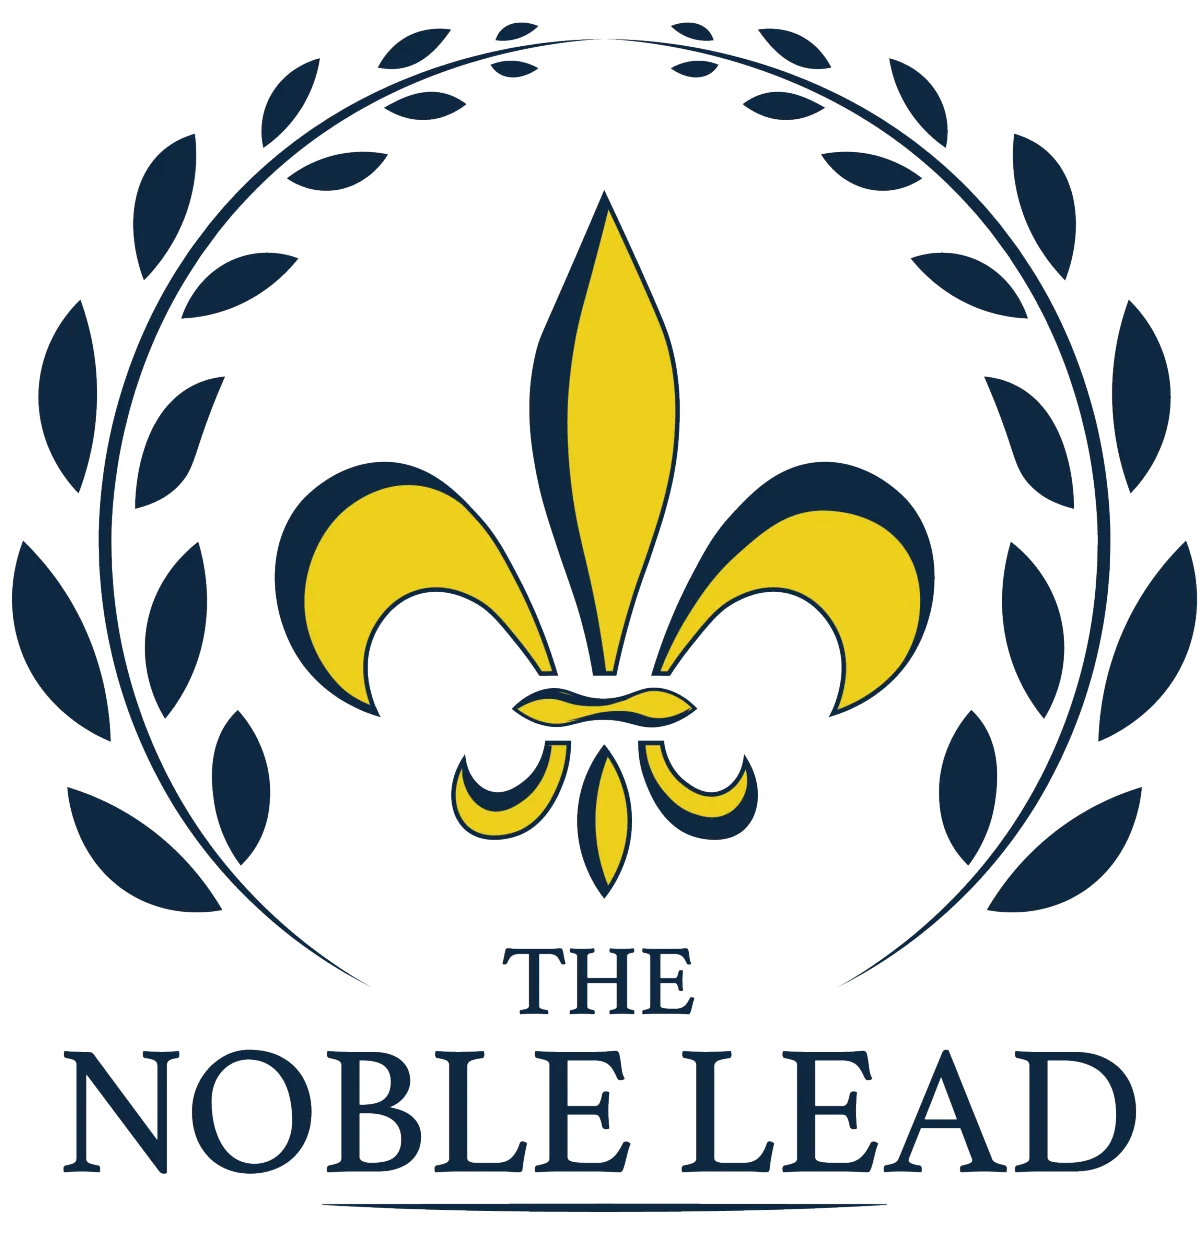 The Noble Lead -  Digital Marketing Consulting Agency